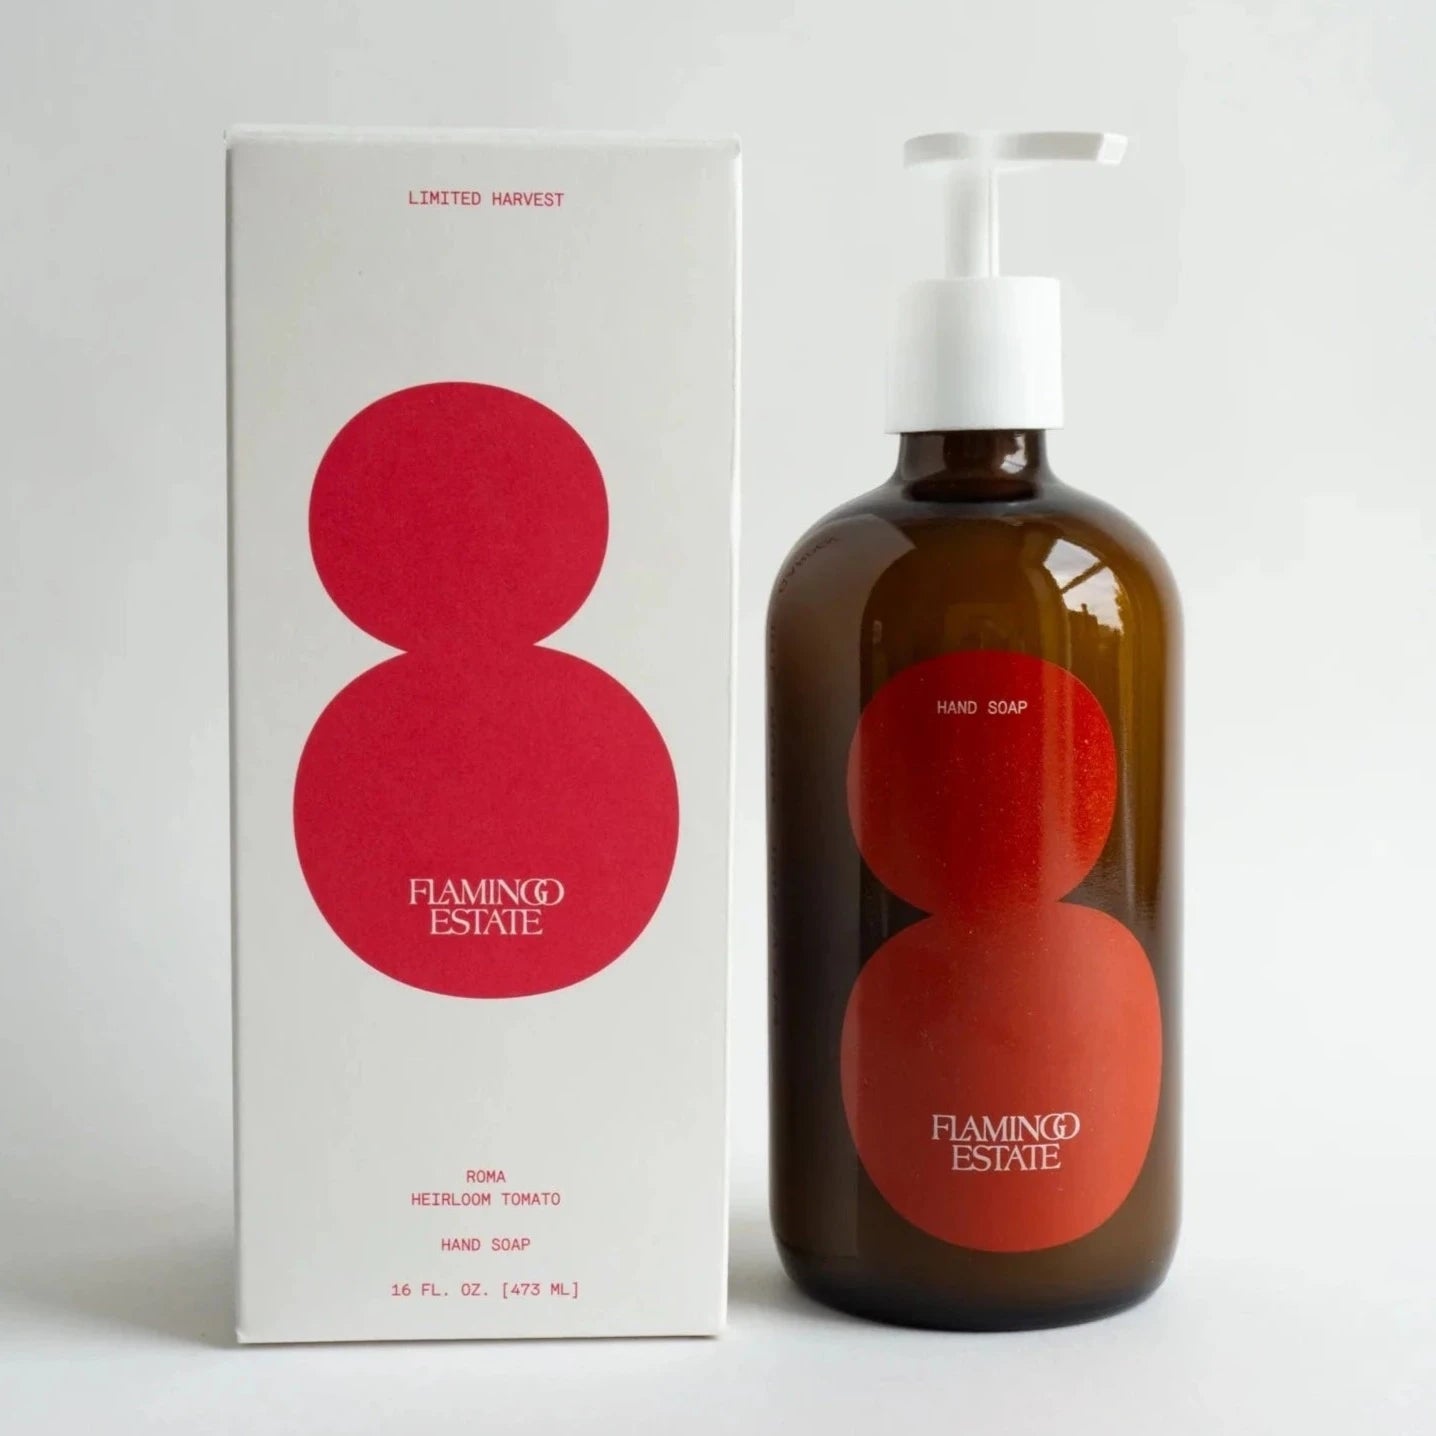 Roma Heirloom Tomato Hand Soap next to red & white packaging